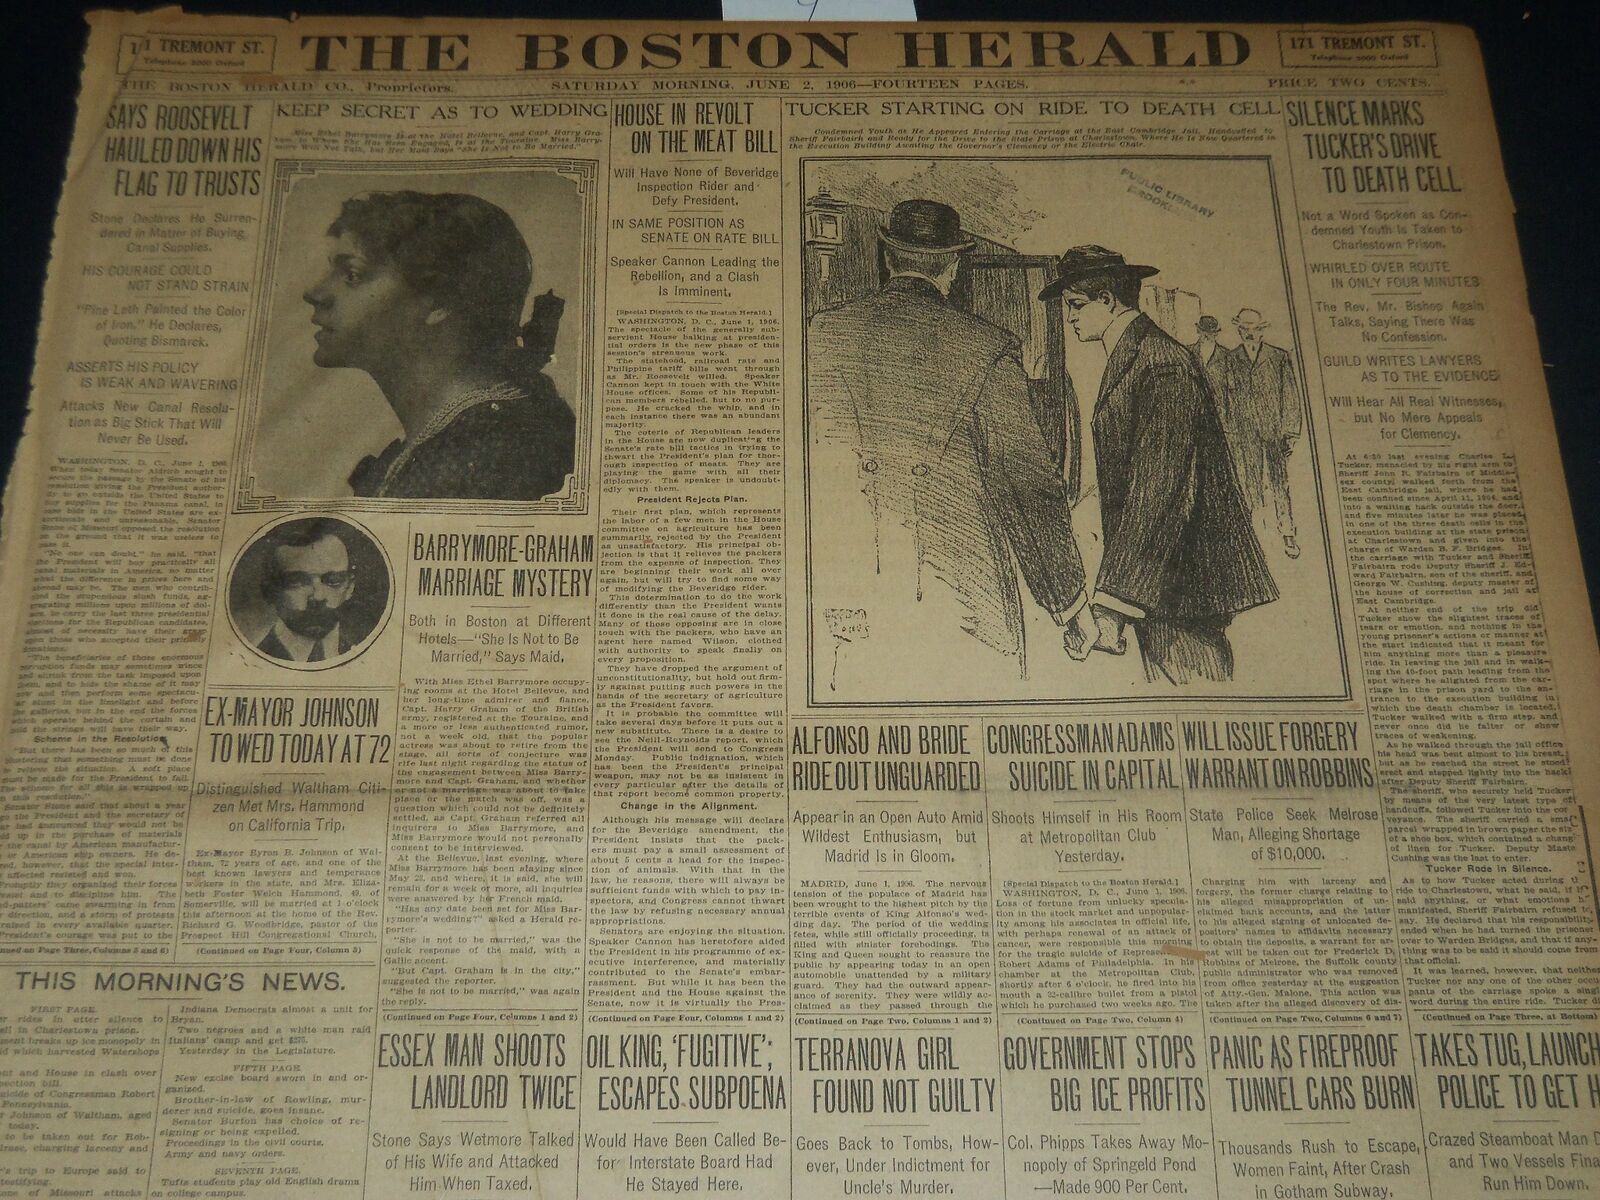 1906 JUNE 2 THE BOSTON HERALD - BARRYMORE - GRAHAM - MARRIAGE MYSTERY - BH 291